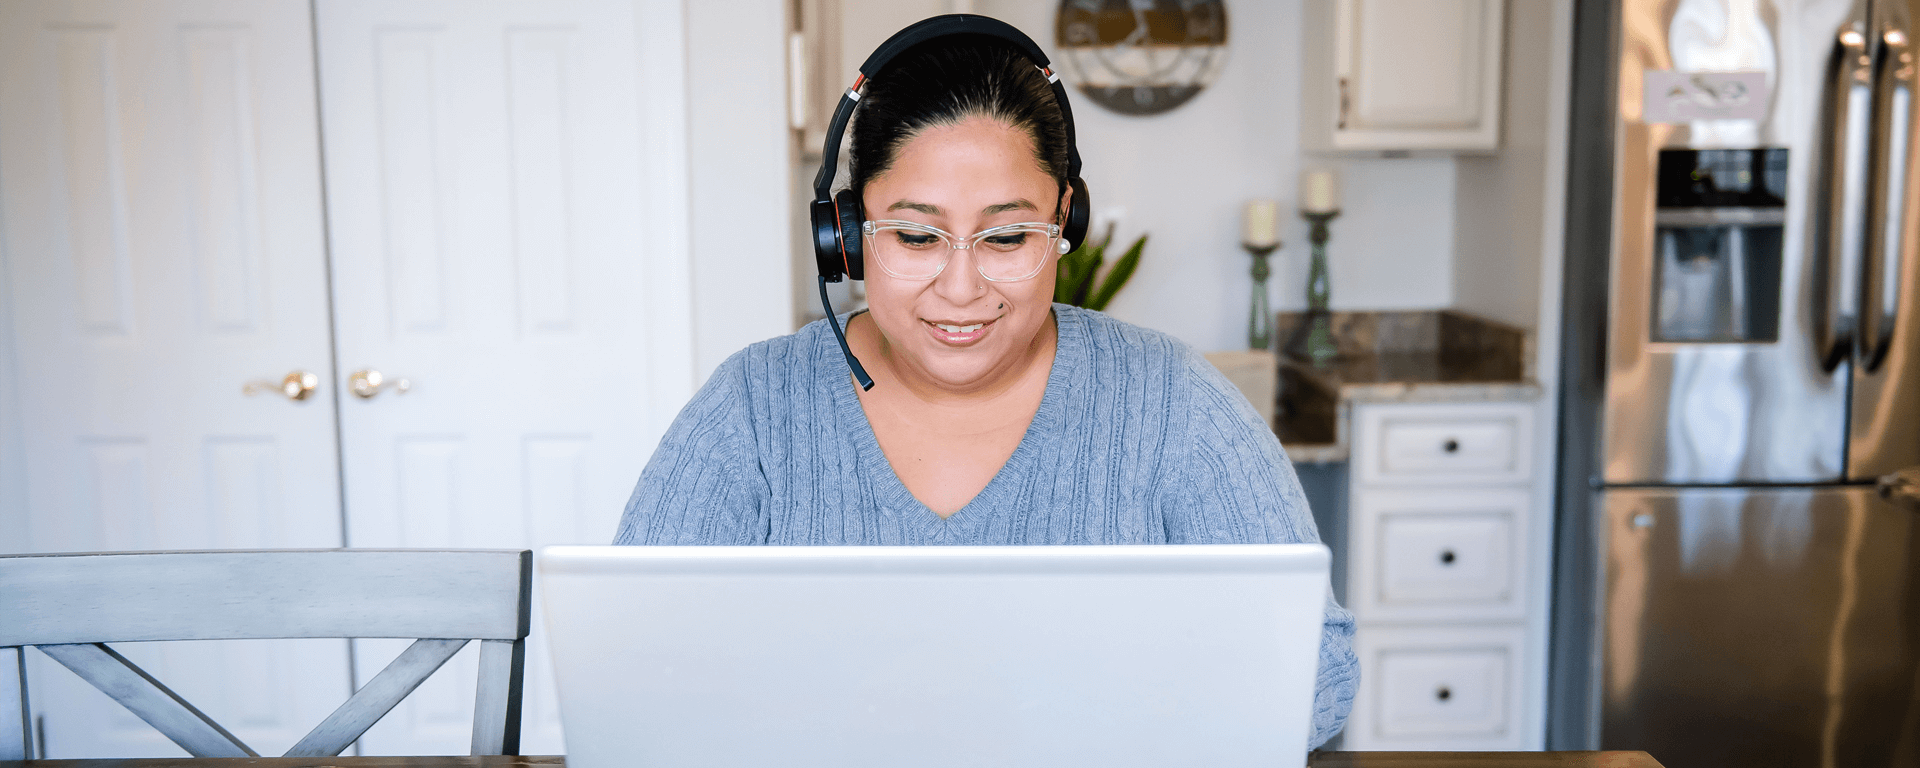 Capital One associate sits at her kitchen table and works from home wearing a headset